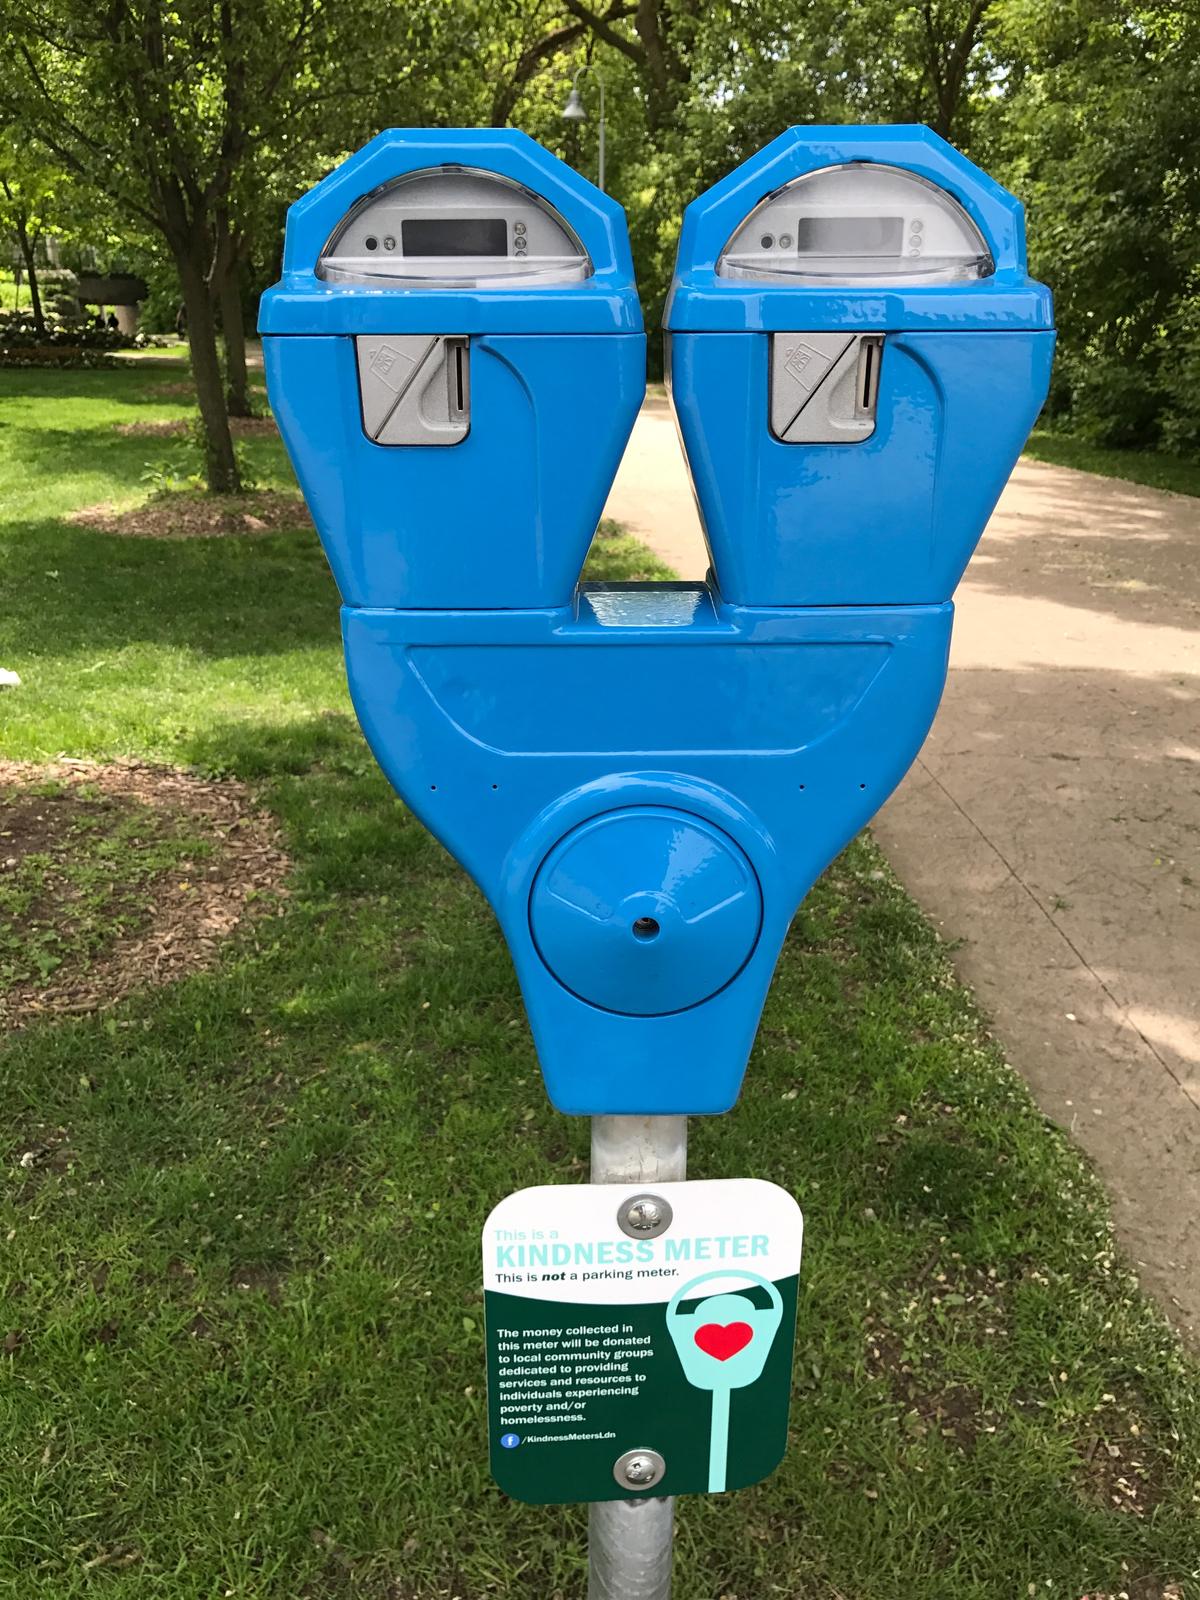 Less than two weeks after being installed, one of five kindness meters in downtown London has been stolen.